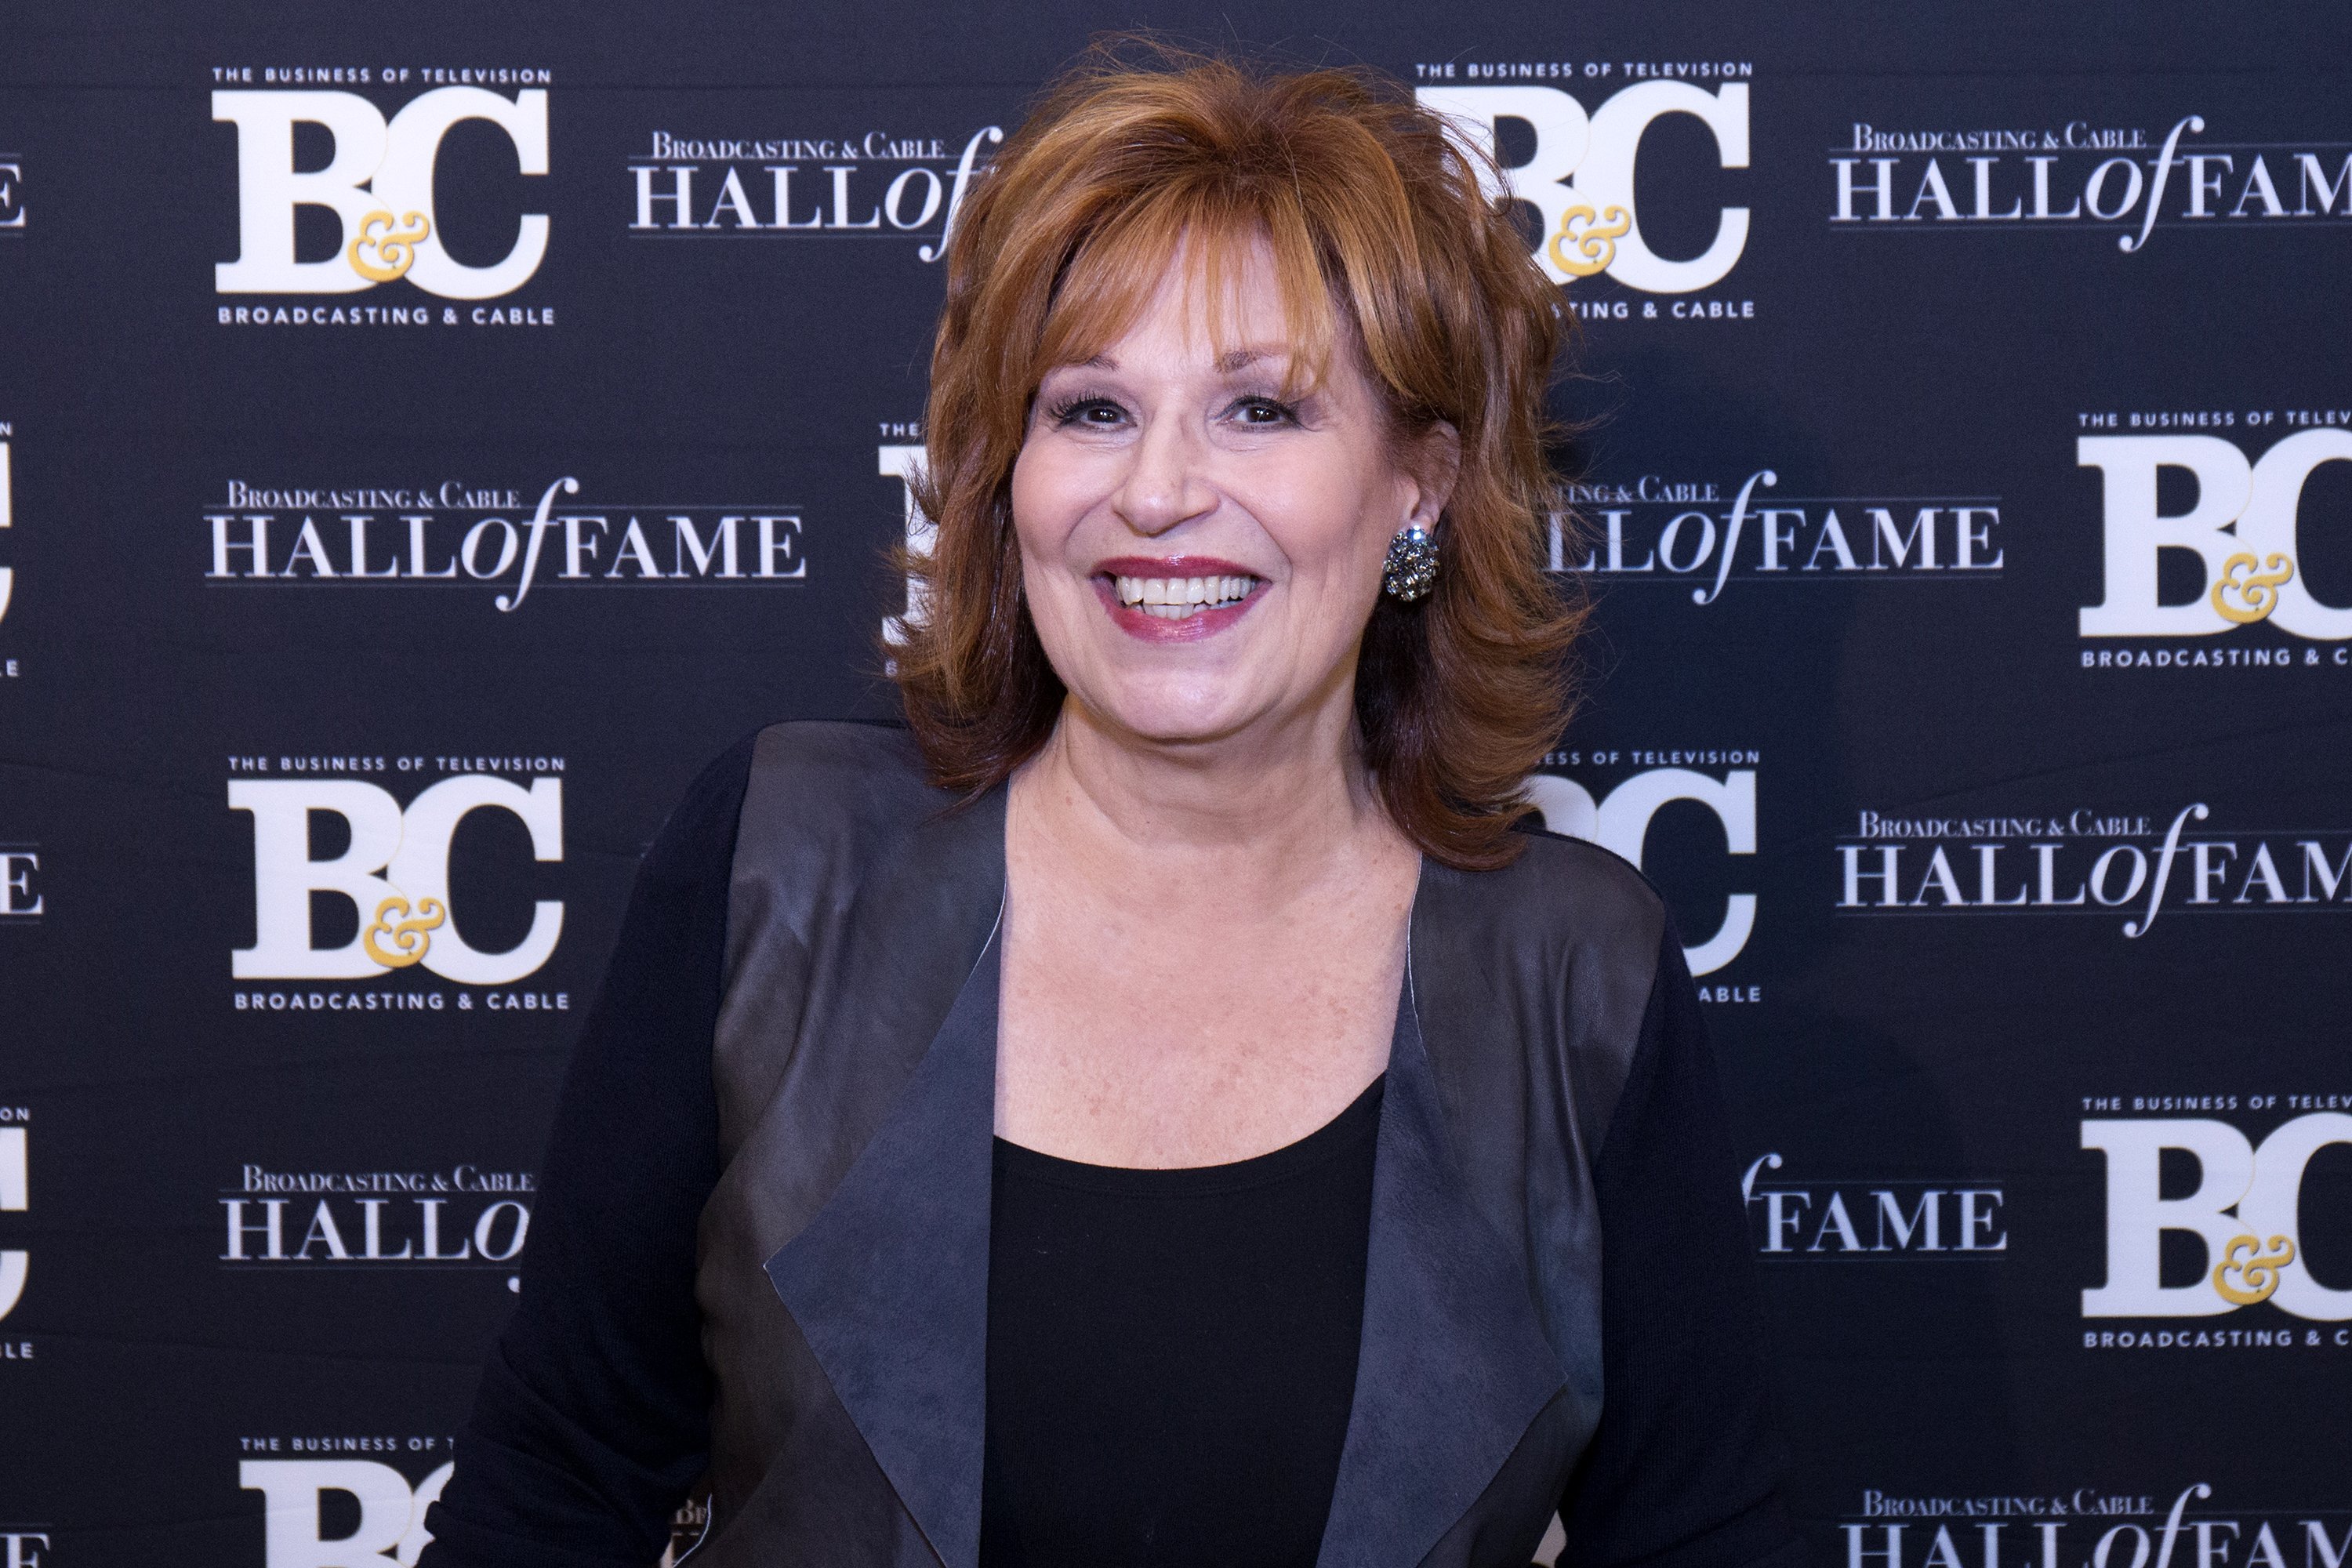 Joy Behar attends the Broadcasting & Cable Hall Of Fame 27th Anniversary Gala in New York City on October 16, 2017 | Photo: Getty Images